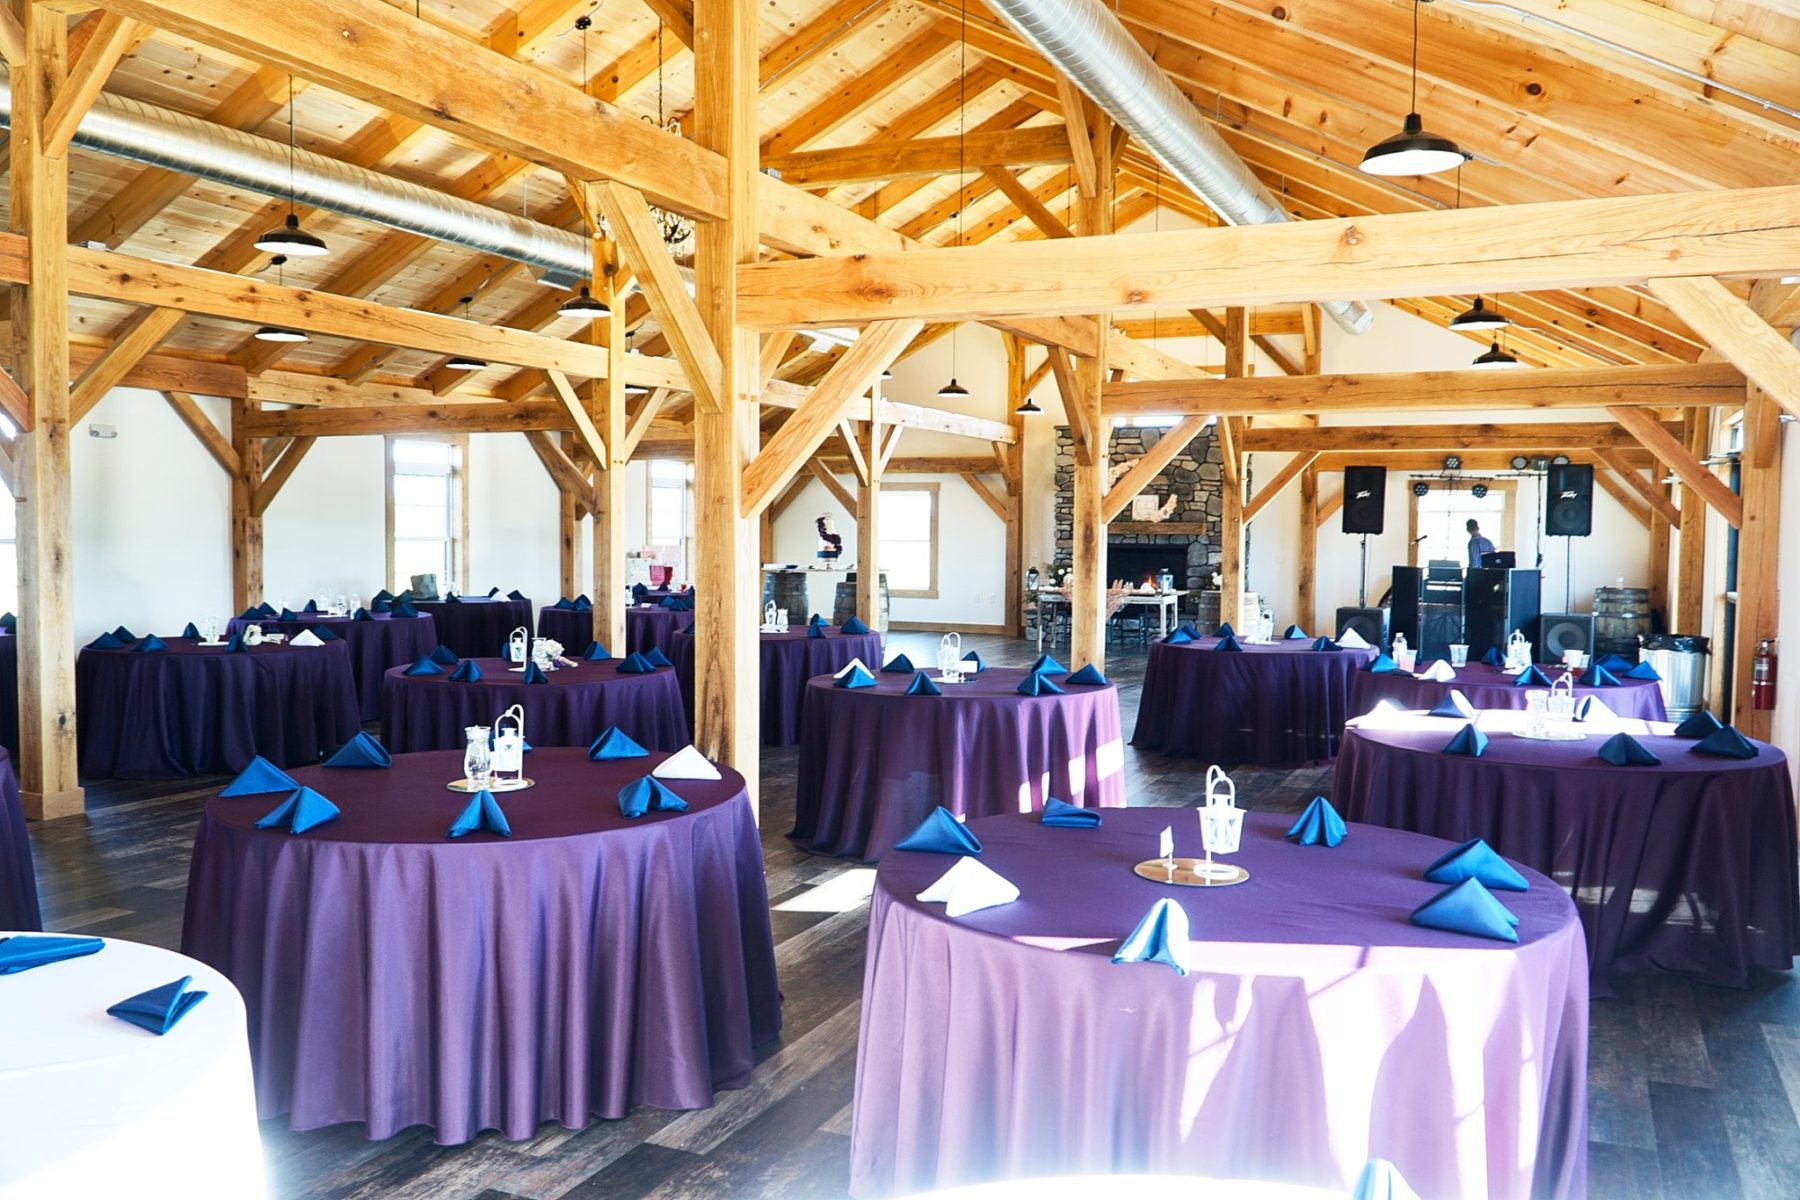 Decorated tables blue table cloths and nakpins - Fox Meadow Barn Blue Ridge Timberwrights Event Venues Gallery